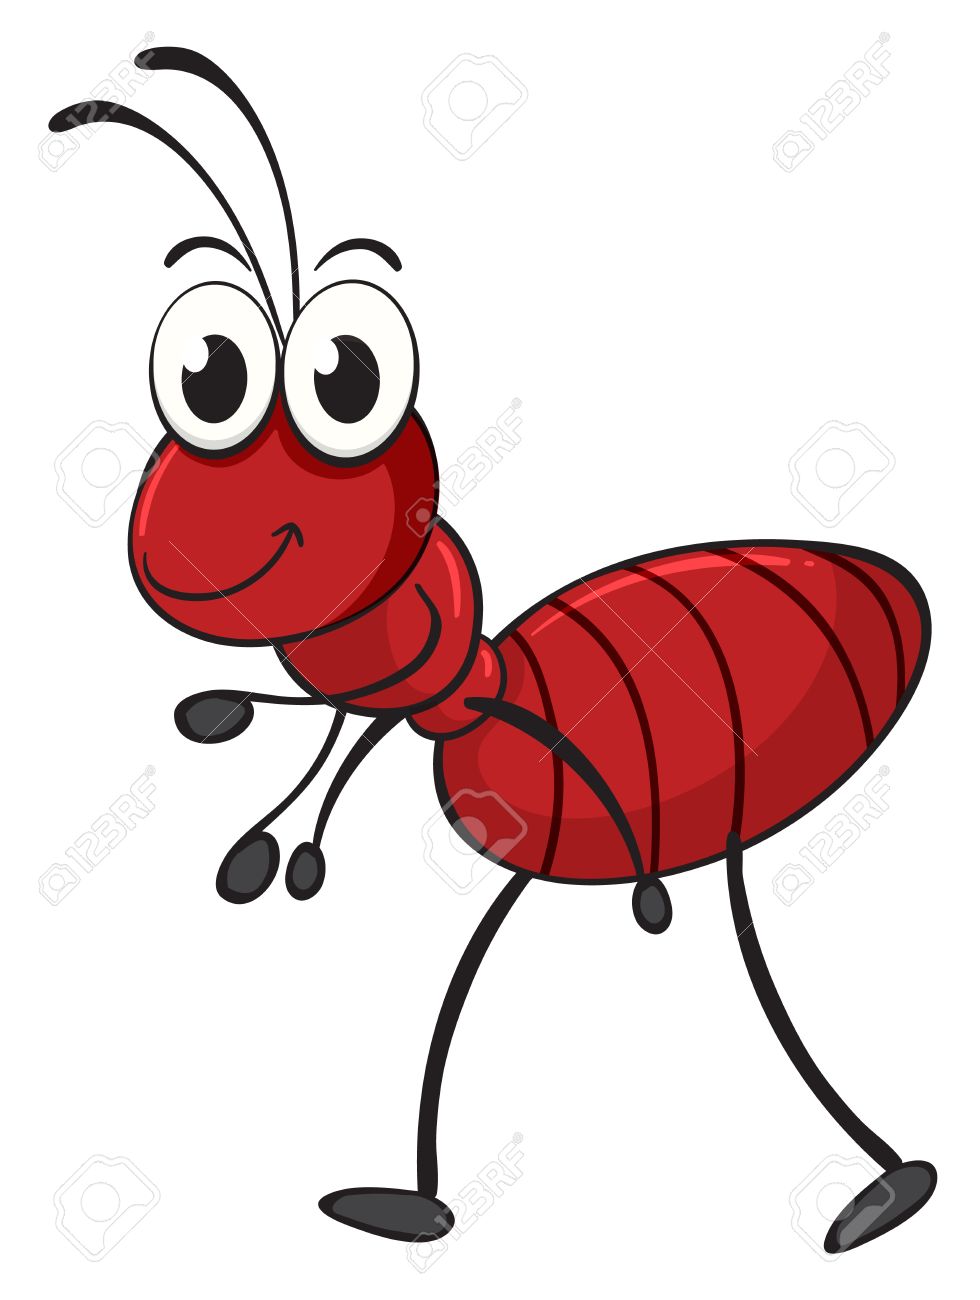 An ant illustration of an ant on a clipart.